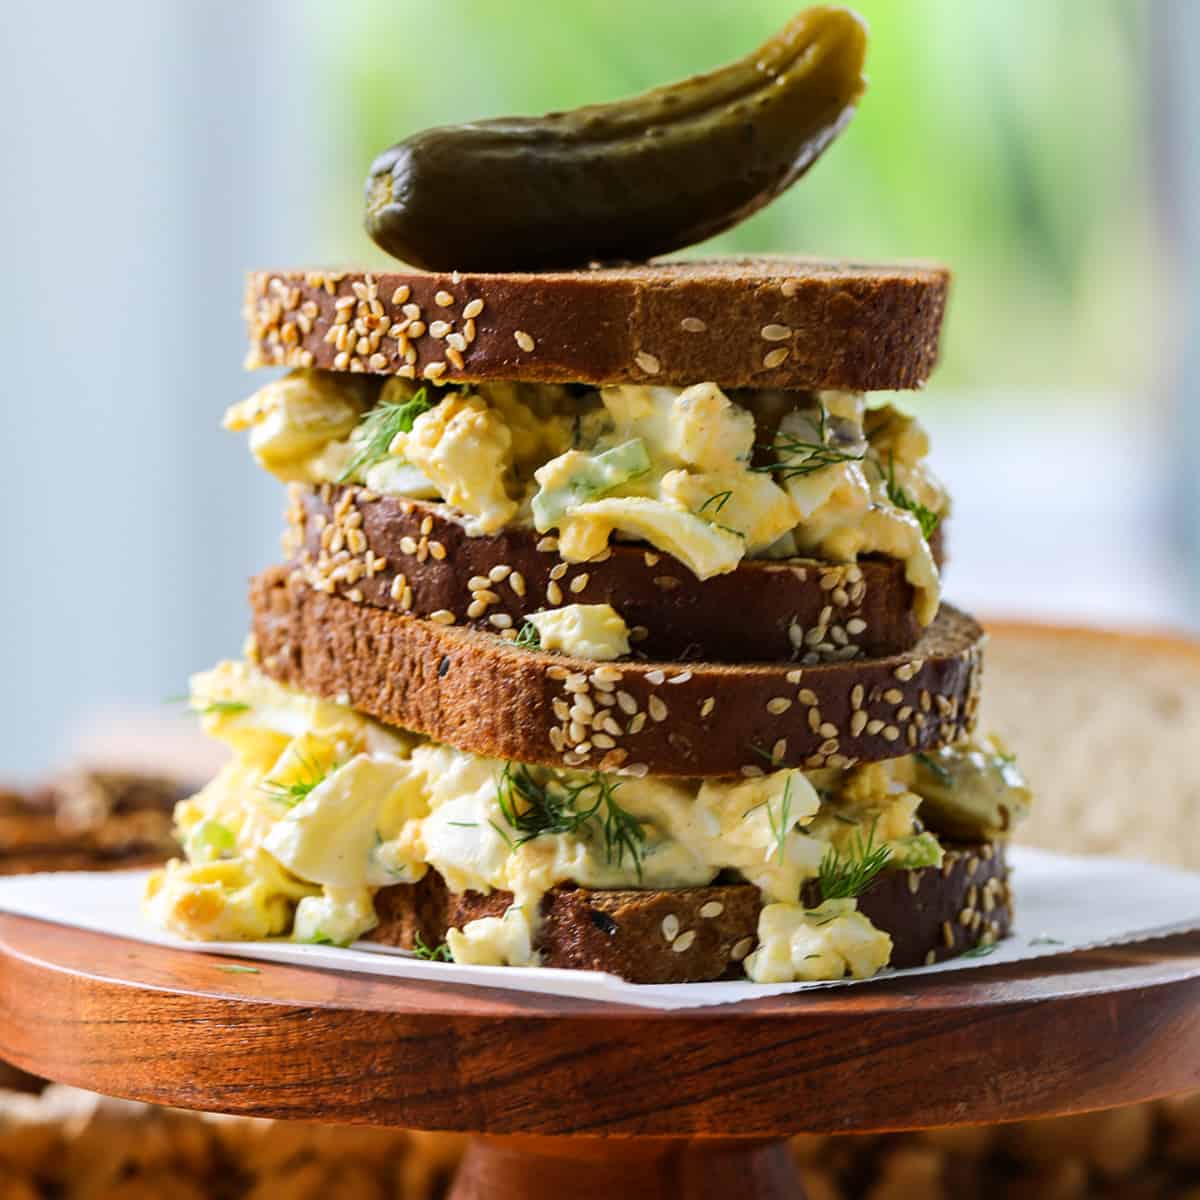 https://www.delicioustable.com/wp-content/uploads/2023/05/Egg-Salad-Recipe-featured.jpg